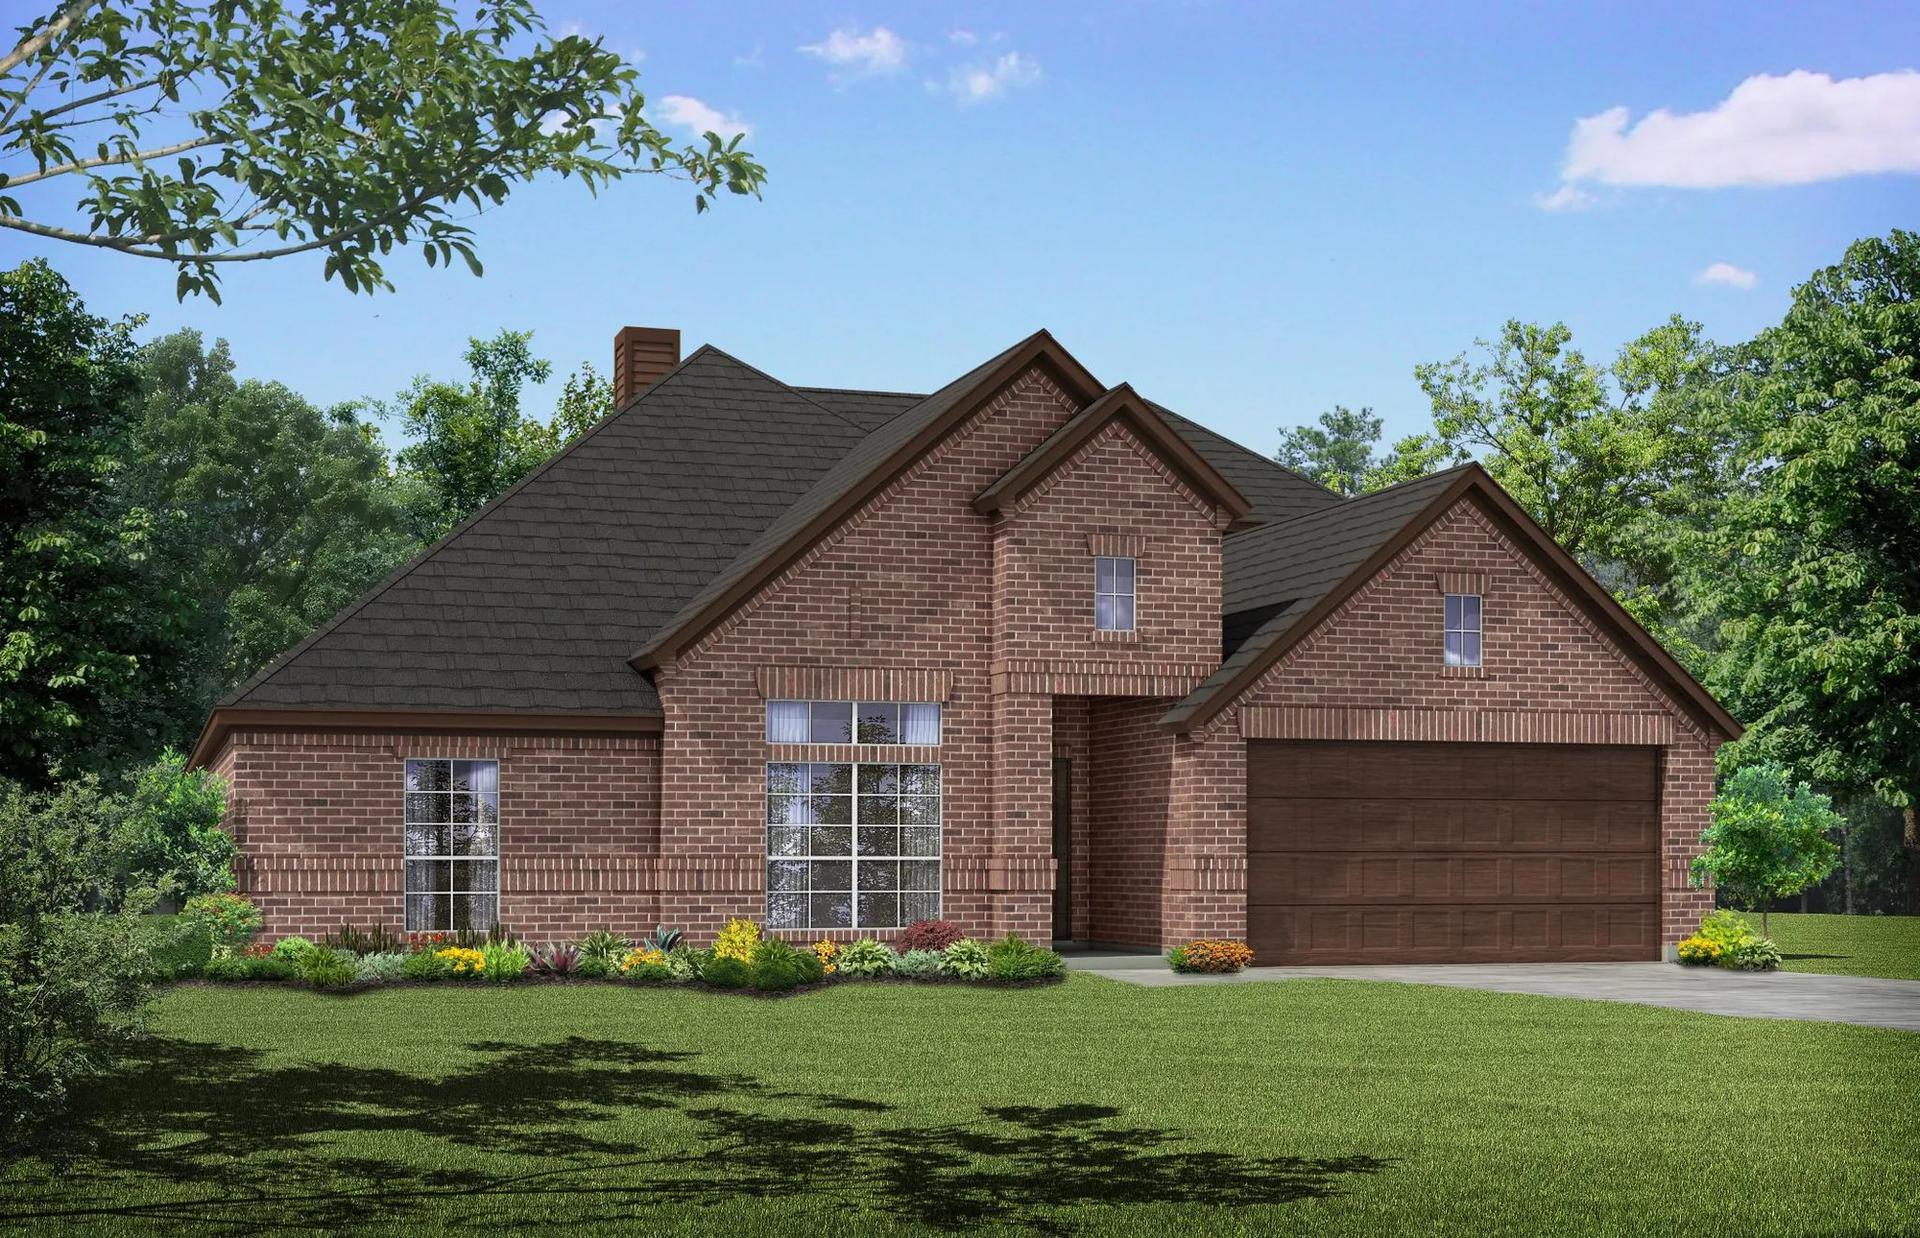 2379 C. Concept 2379 Home with 3 Bedrooms